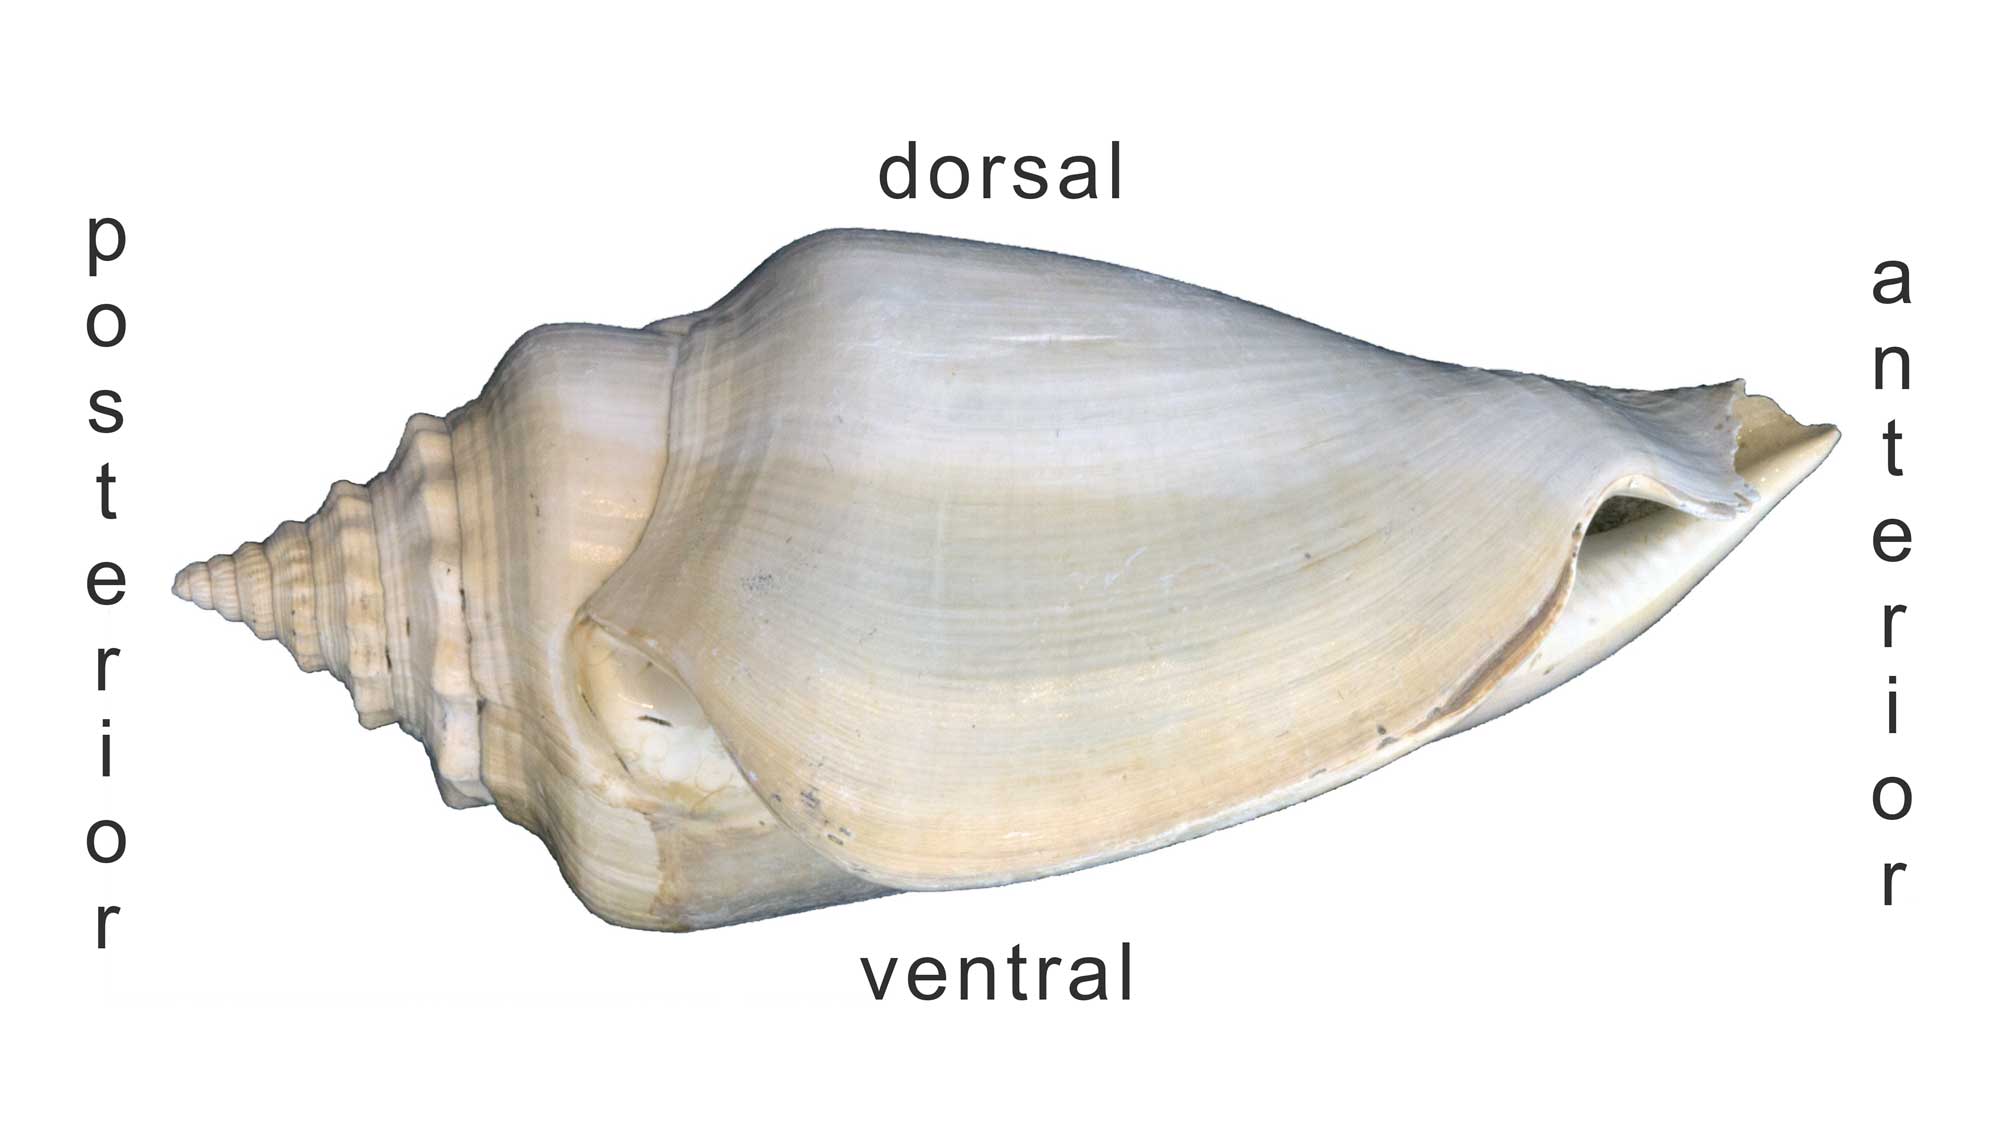 Photograph of a fossil Strombus shell showing the posterior, anterior, dorsal, and ventral sides.